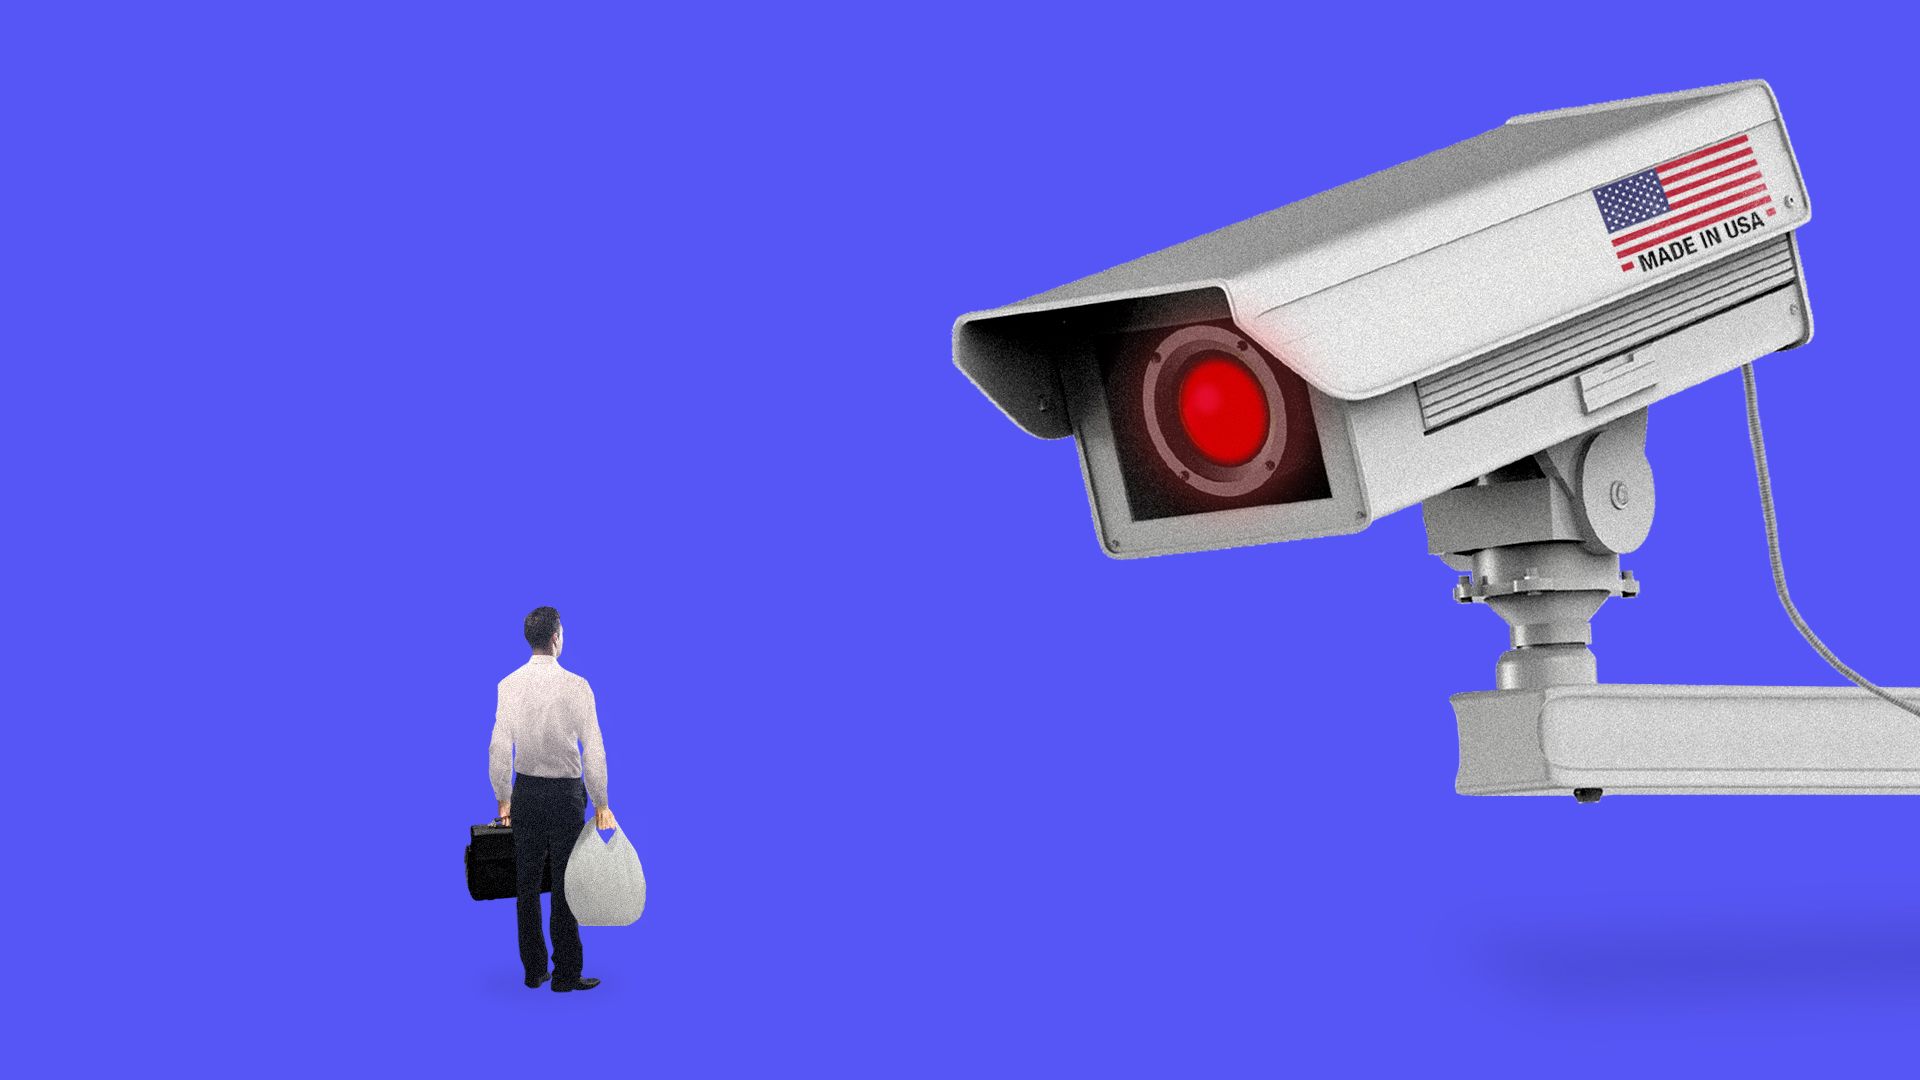 A surveillance camera labeled "Made in USA" is pointed at a man